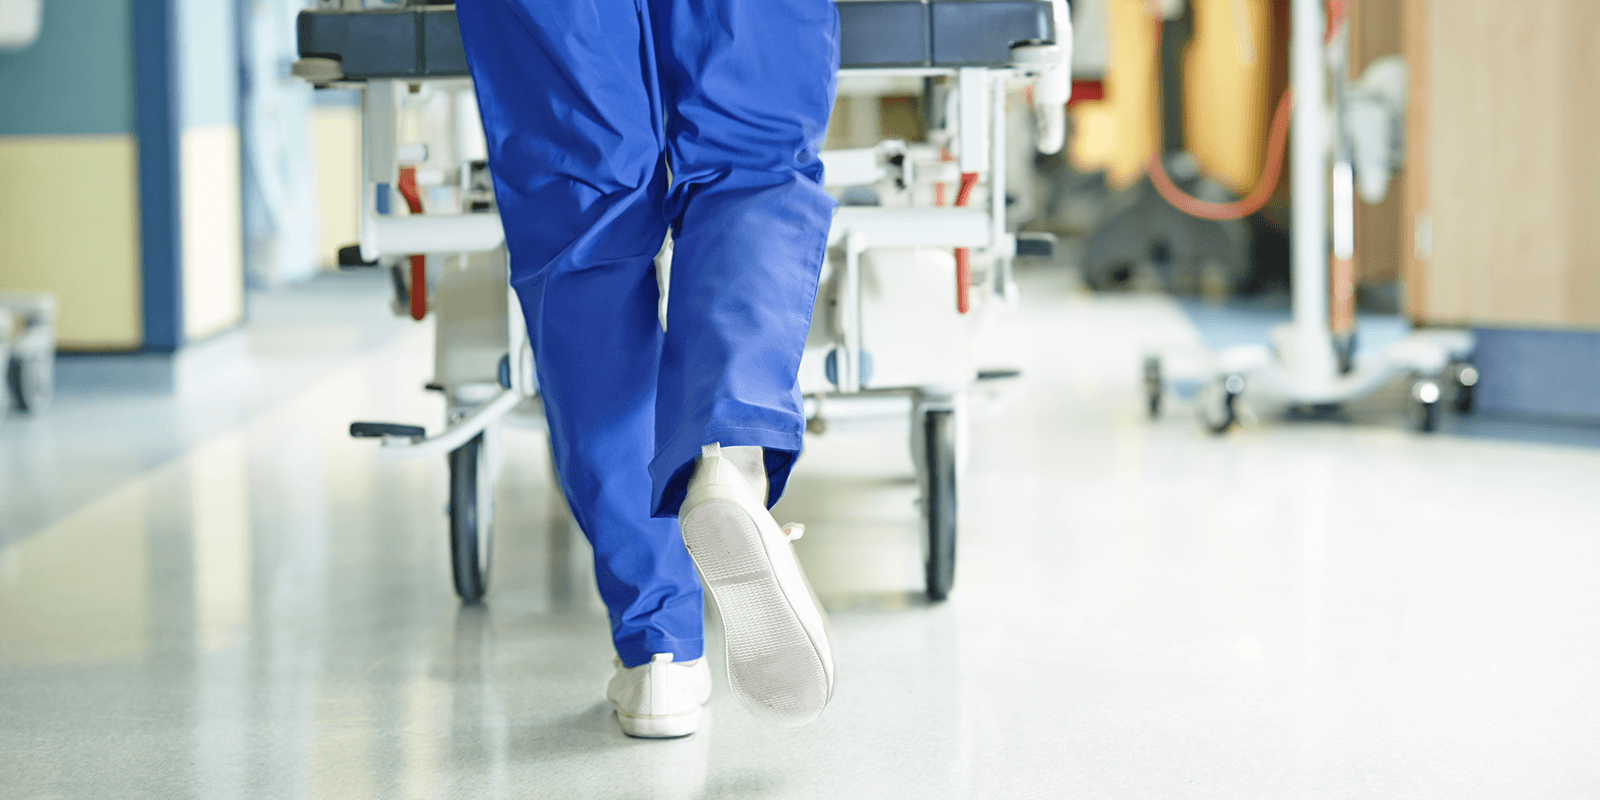 Image of a hospital employee wearing blue scrubs pushing a stretcher down a hallway. 